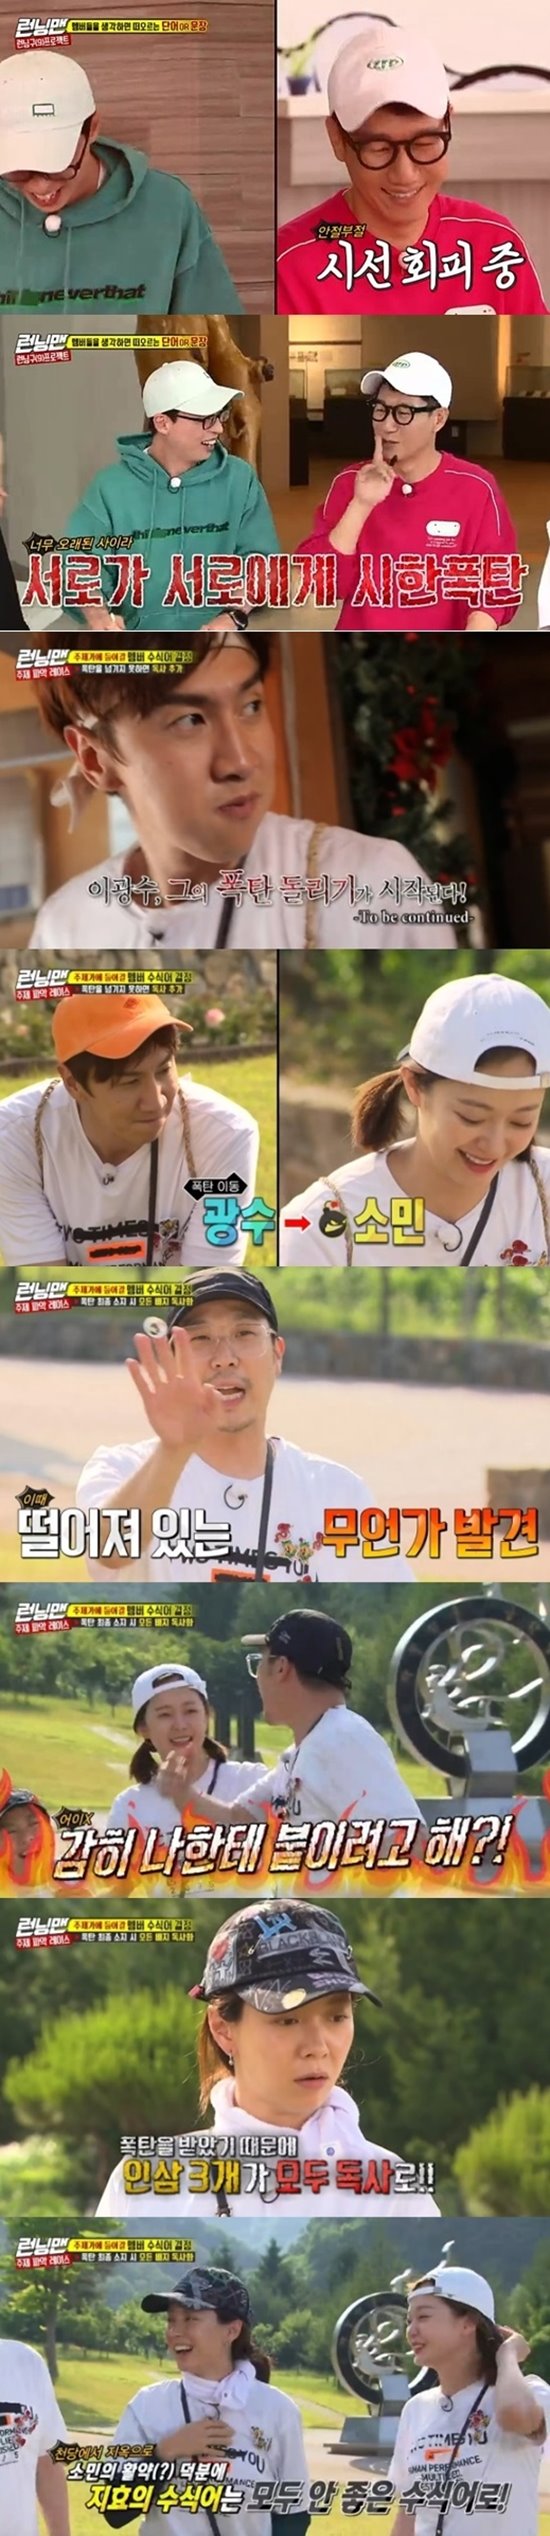 Running Man kept its top spot in the same time zone of 2049 Target Viewpoint.According to Nielsen Korea, a ratings agency on the 17th, SBS entertainment Running Man, which was broadcast on the 16th, soared to 8.4% of the highest audience rating per minute, and the 2049 target audience rating, an important indicator of major advertising officials, recorded 3.8% (based on the second part of the audience rating of households in the Seoul Capital Area), ranking first in the same time zone, surpassing Masked Wang and Donkey Ears.The average audience rating was 5.2% in the first part and 6.8% in the second part (based on the audience rating of households in the Seoul Capital Area).The broadcast was decorated with a theme-reading race for the theme song to be presented at the Fan Meeting this summer.The members had to set the number of good modifiers ( Ginseng badges) and bad modifiers (poison badges) of the theme song while they decided to participate in the songwriting of the theme song themselves, and had to move to the bomb within an hour of the bomb because there was a bomb.Because there is a time limit for bombs, if you pass that time, you will get a viper badge. Even if you take it, you will get another viper badge.Among them, Jeon So-min showed off the like a poison that led to the reversal, shook the plate of the race, and noticed that he had a bomb late on the last mission.The scene soared to 8.4% of the audience rating per minute, accounting for the best one minute.So, Jeon So-min showed boldness of handing over his bomb to Song Ji-ryu, and Song Ji-hyo, who ran Race 1st pRace, had to watch his ginseng badge turned into a poison badge at the last minute.Yoo Jae-Suk took the first pRace in the race with Fisherman Jiri, and Yoo Jae-Suk chose a modifier to enter the theme song based on the badge of each member.The Running Man Theme Song, which participated in the members lyrics, will be unveiled at the Running Man Fan Meeting to be held this summer.Photo = SBS Broadcasting Screen